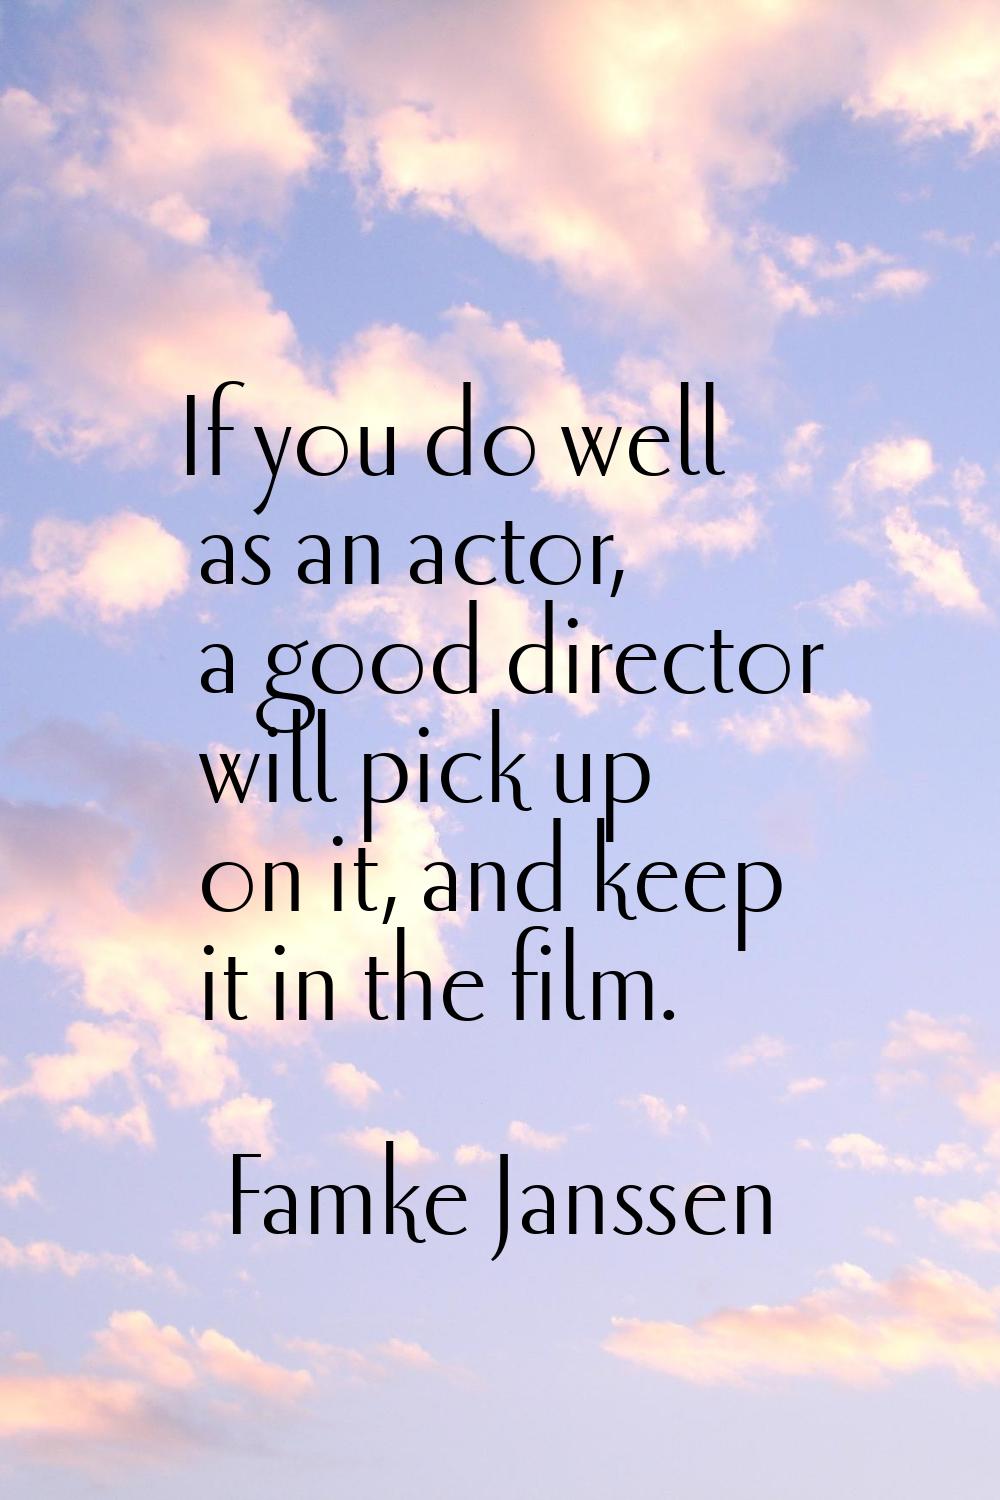 If you do well as an actor, a good director will pick up on it, and keep it in the film.